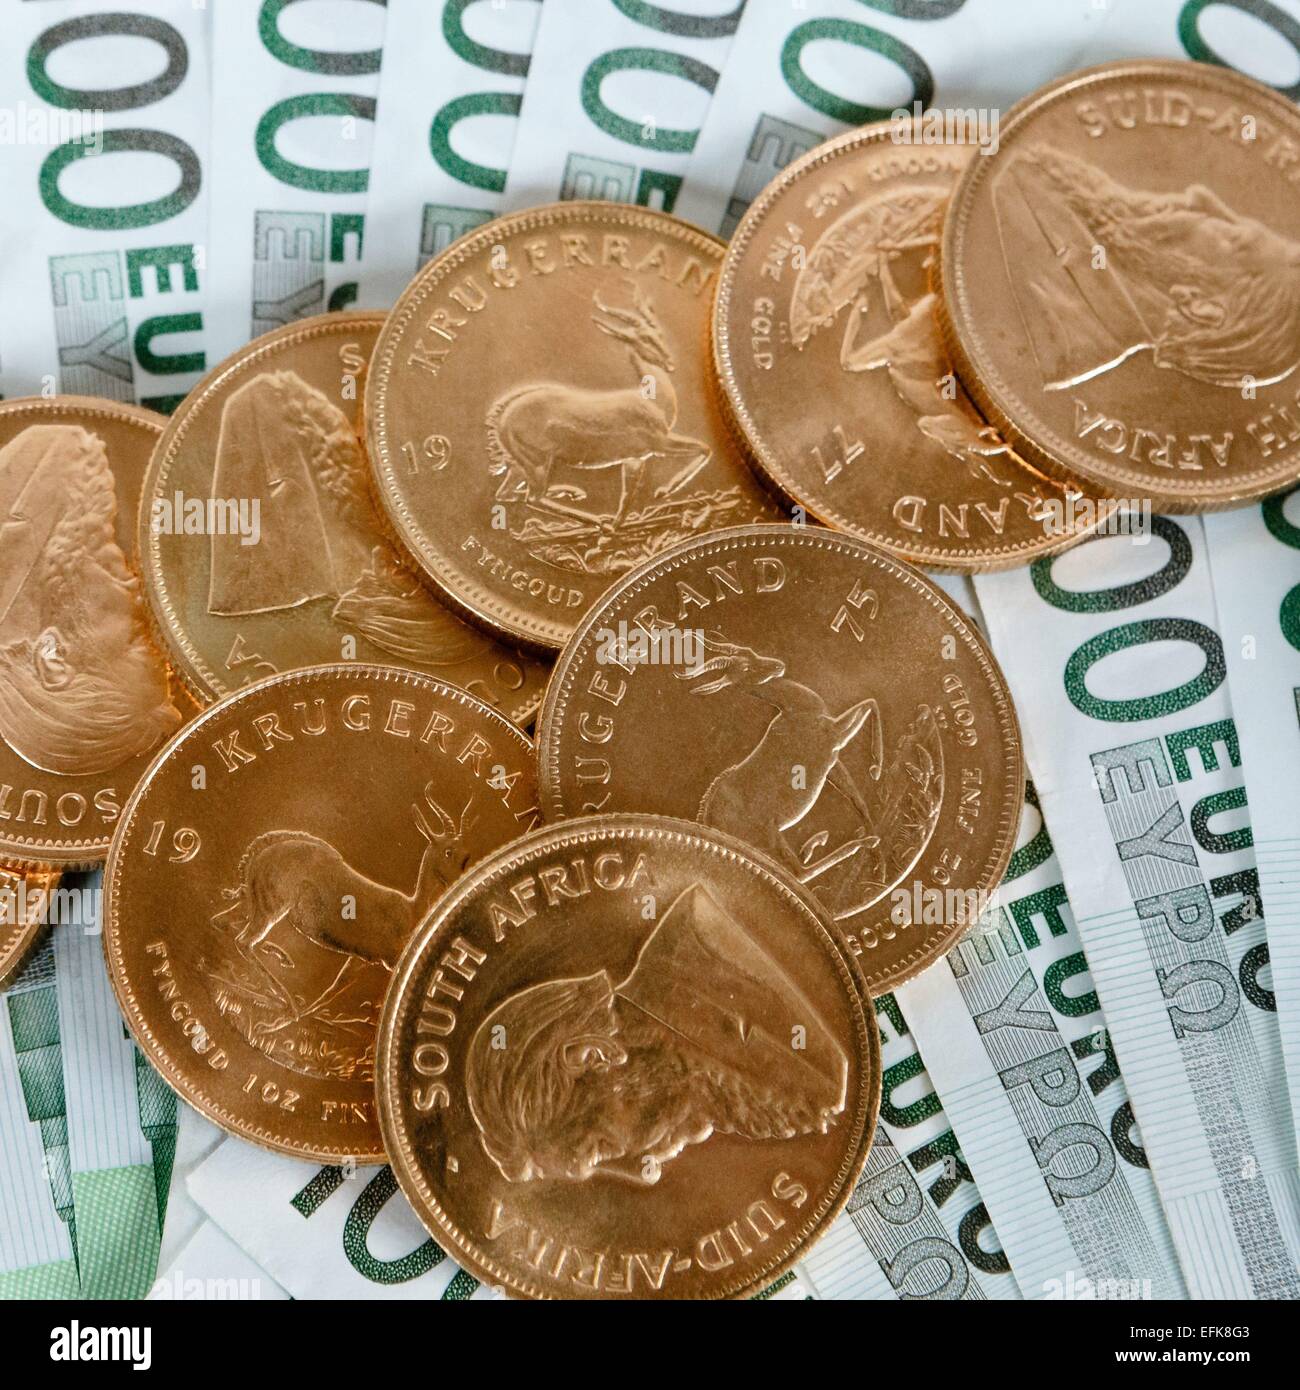 Krugerrand gold coins and euro bills Stock Photo